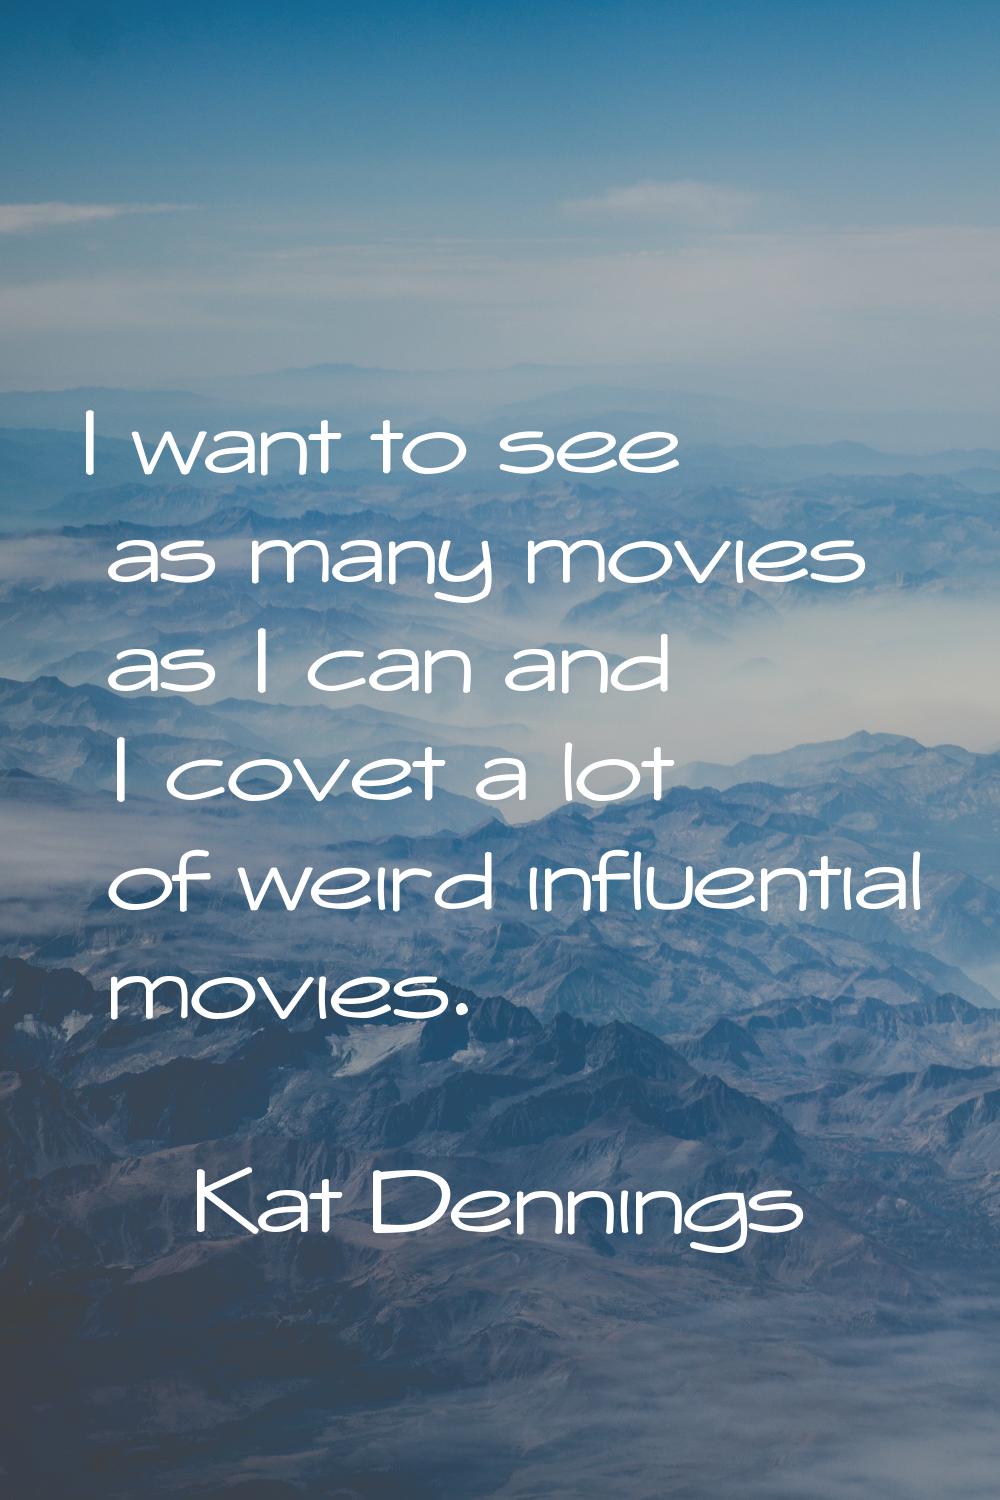 I want to see as many movies as I can and I covet a lot of weird influential movies.